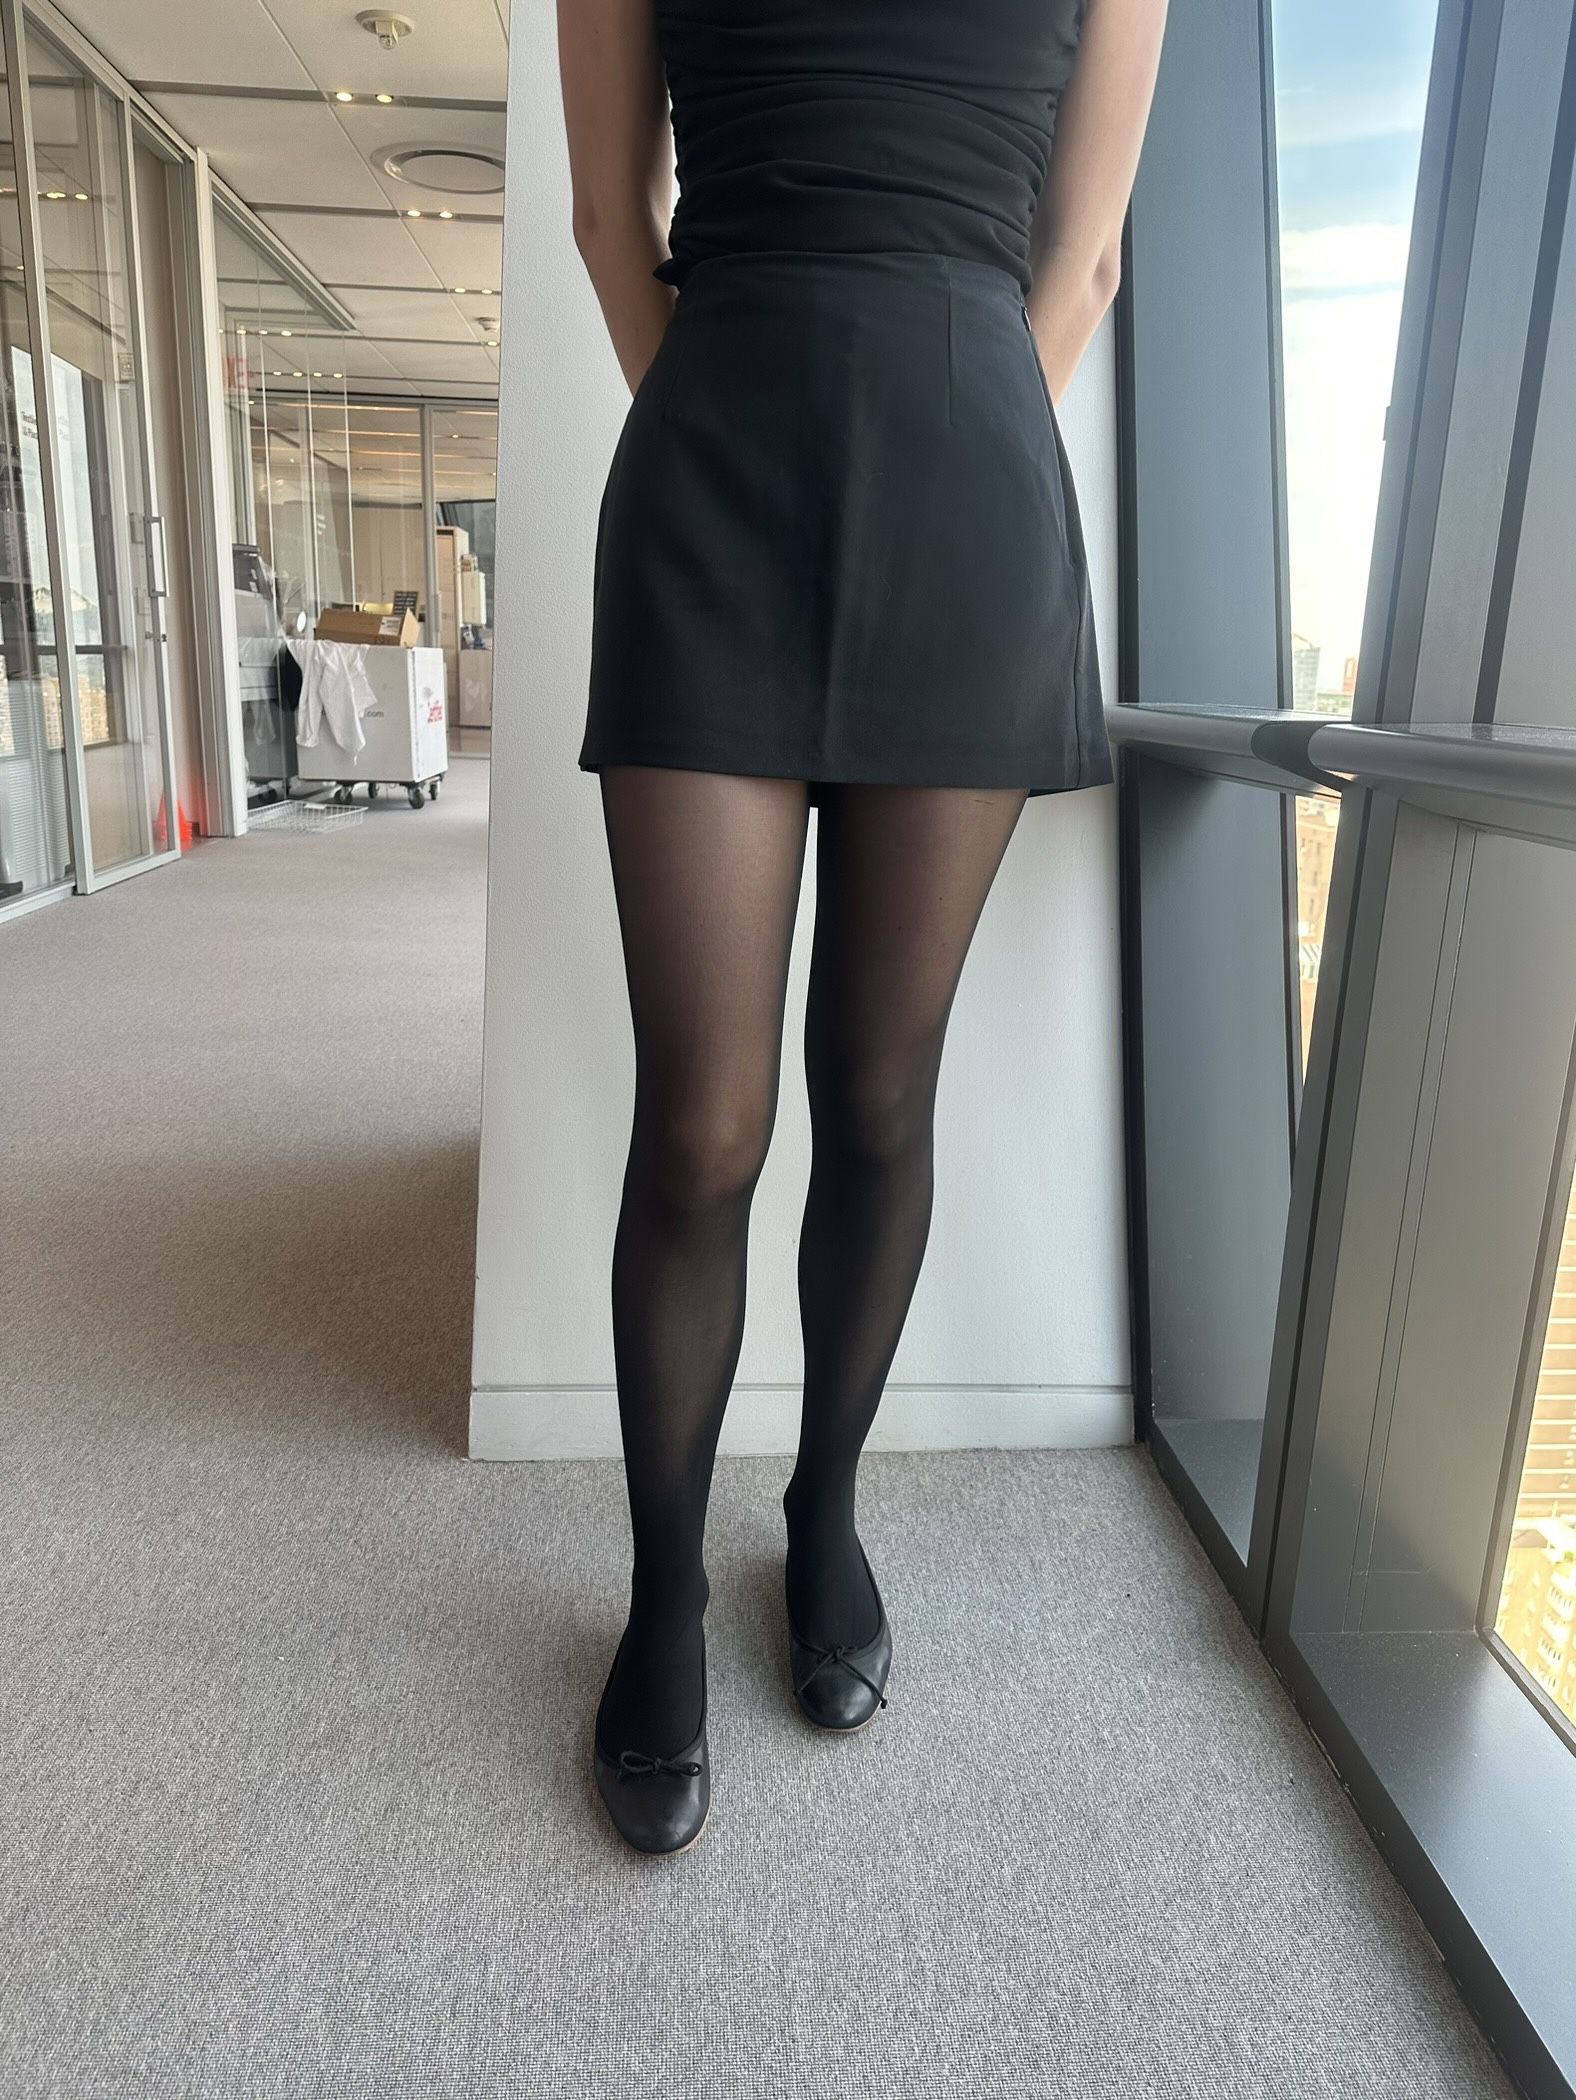 Are Sheertex Tights Worth It? Reviewing the Unbreakable Sheer